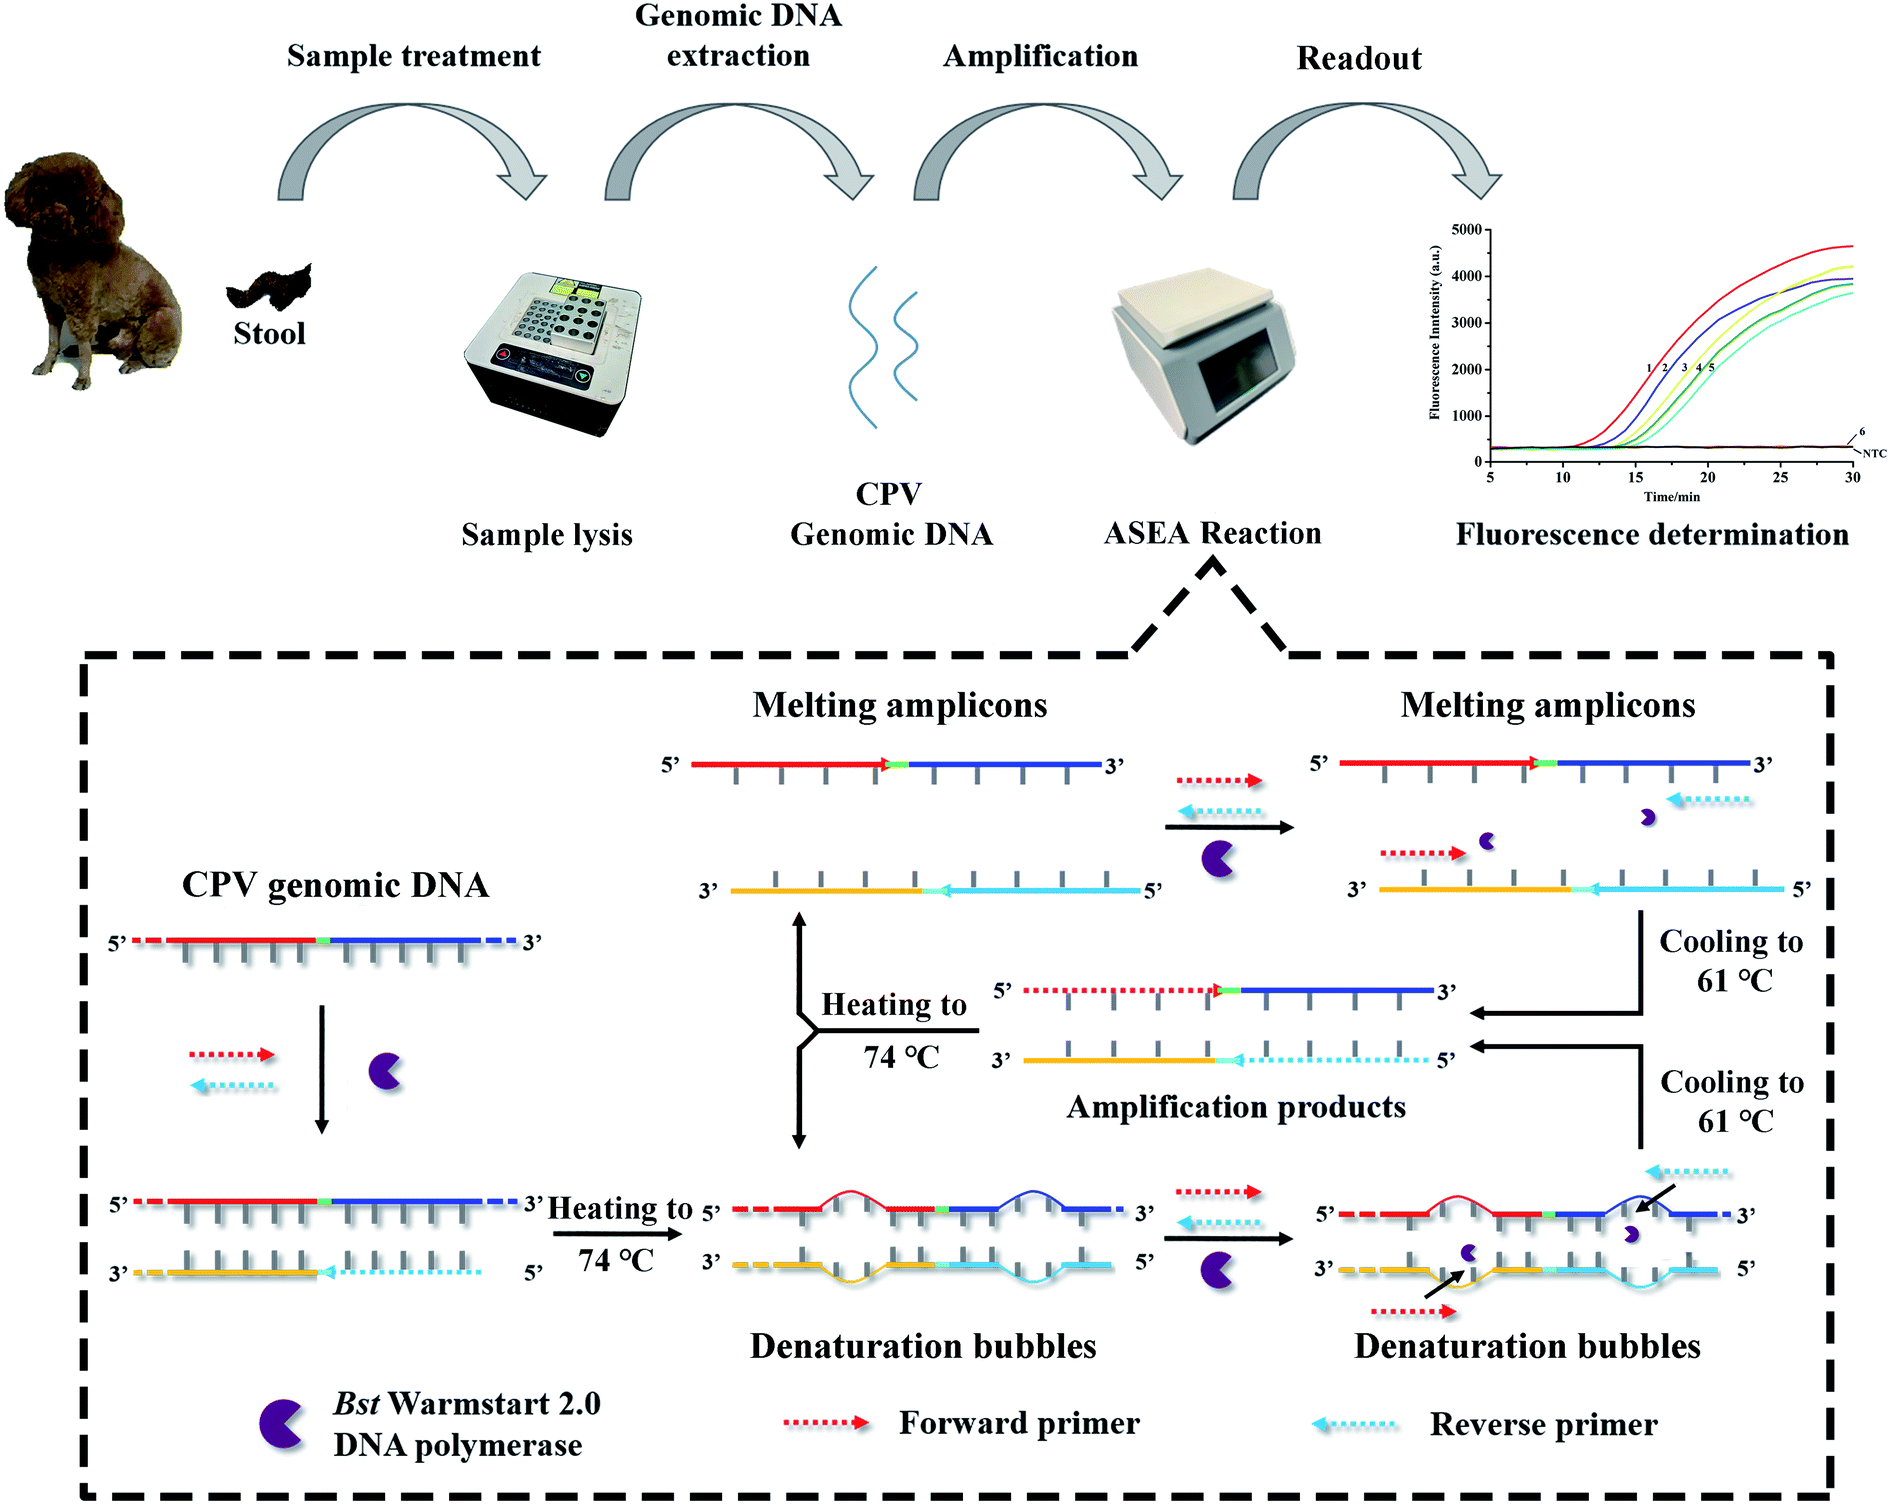 Accelerated Denaturation Bubble Mediated Strand Exchange Amplification For Rapid And Accurate Detection Of Canine Parvovirus Analytical Methods Rsc Publishing Doi 10 1039 D0aye